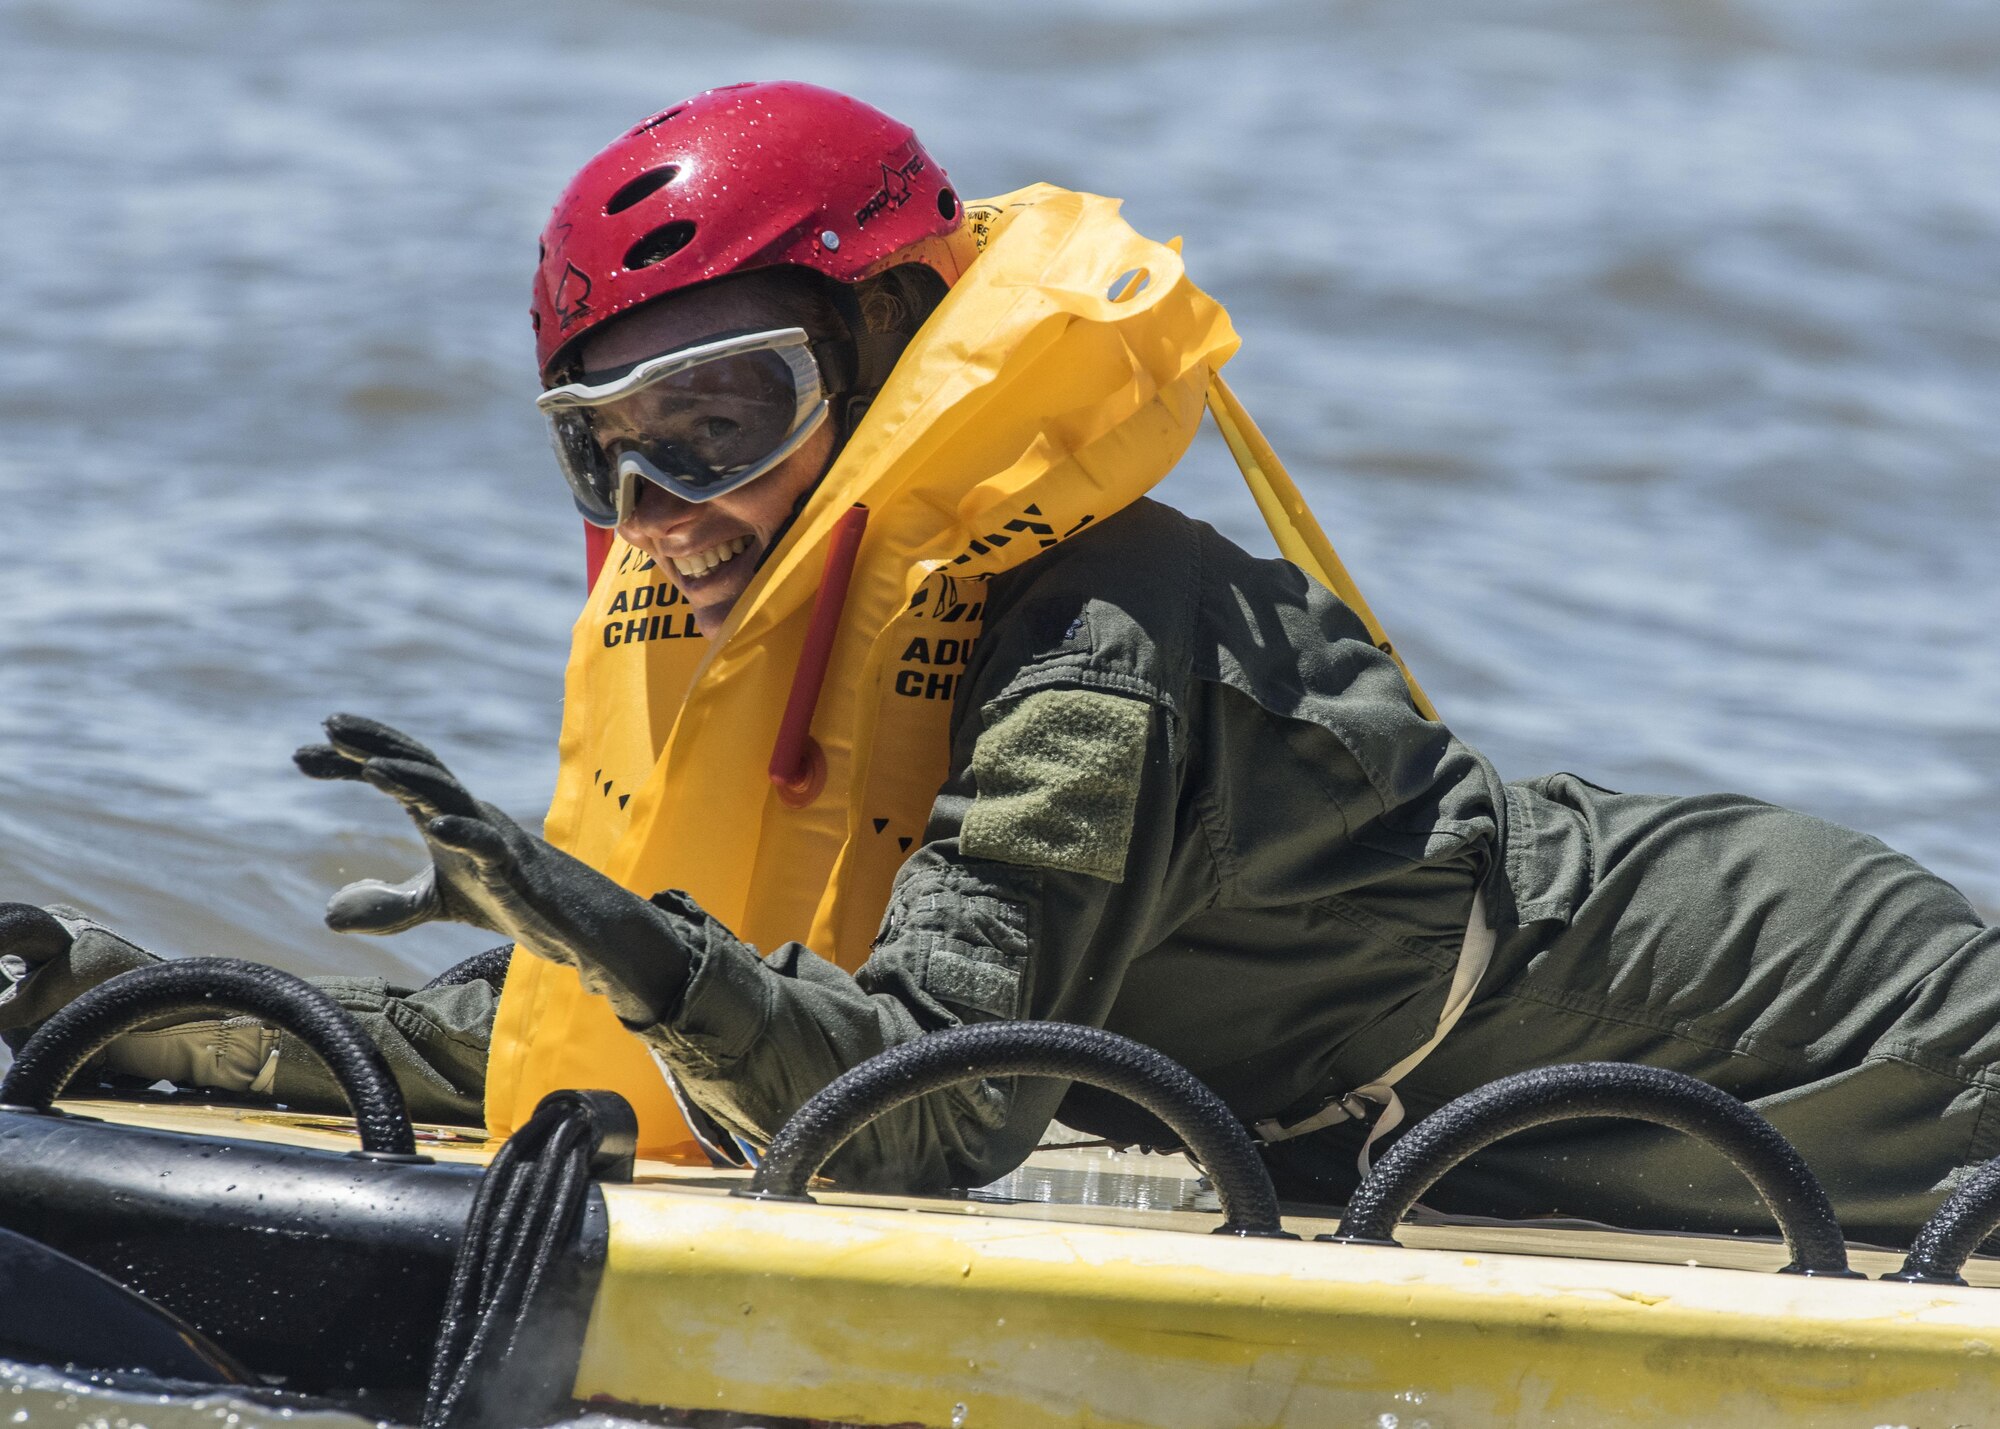 Lt. Col. Brooke Matson, 375th Operations Support Squadron from Scott Air Force Base,  prepare for their her ever medical evacuation water extraction with the 6-101st Aviation Regiment from Fort Campell, Kentucky at Lake Carlyle, Illinois, June 7, 2017. Matson, Lt. Col. Brandon Dow, 54th Airlift Squadron and Maj. Madison Basil Jr., Air Mobility Command, received hoist, water survival and flare training to learn how to survive in aqautic situations long enough to be rescued. The 101st Combat Aviation Brigade has served in almost every single military operation since the Vietnam War, including combat, peacekeeping, and humanitarian. By partnering with AMC's SERE instructors, this training allows for joint-service coordination while preparing aerial crew members to survive in austere locations ater being displaced from their aircraft. (U.S.Air Force photo by Airman 1st Class Daniel Garcia)